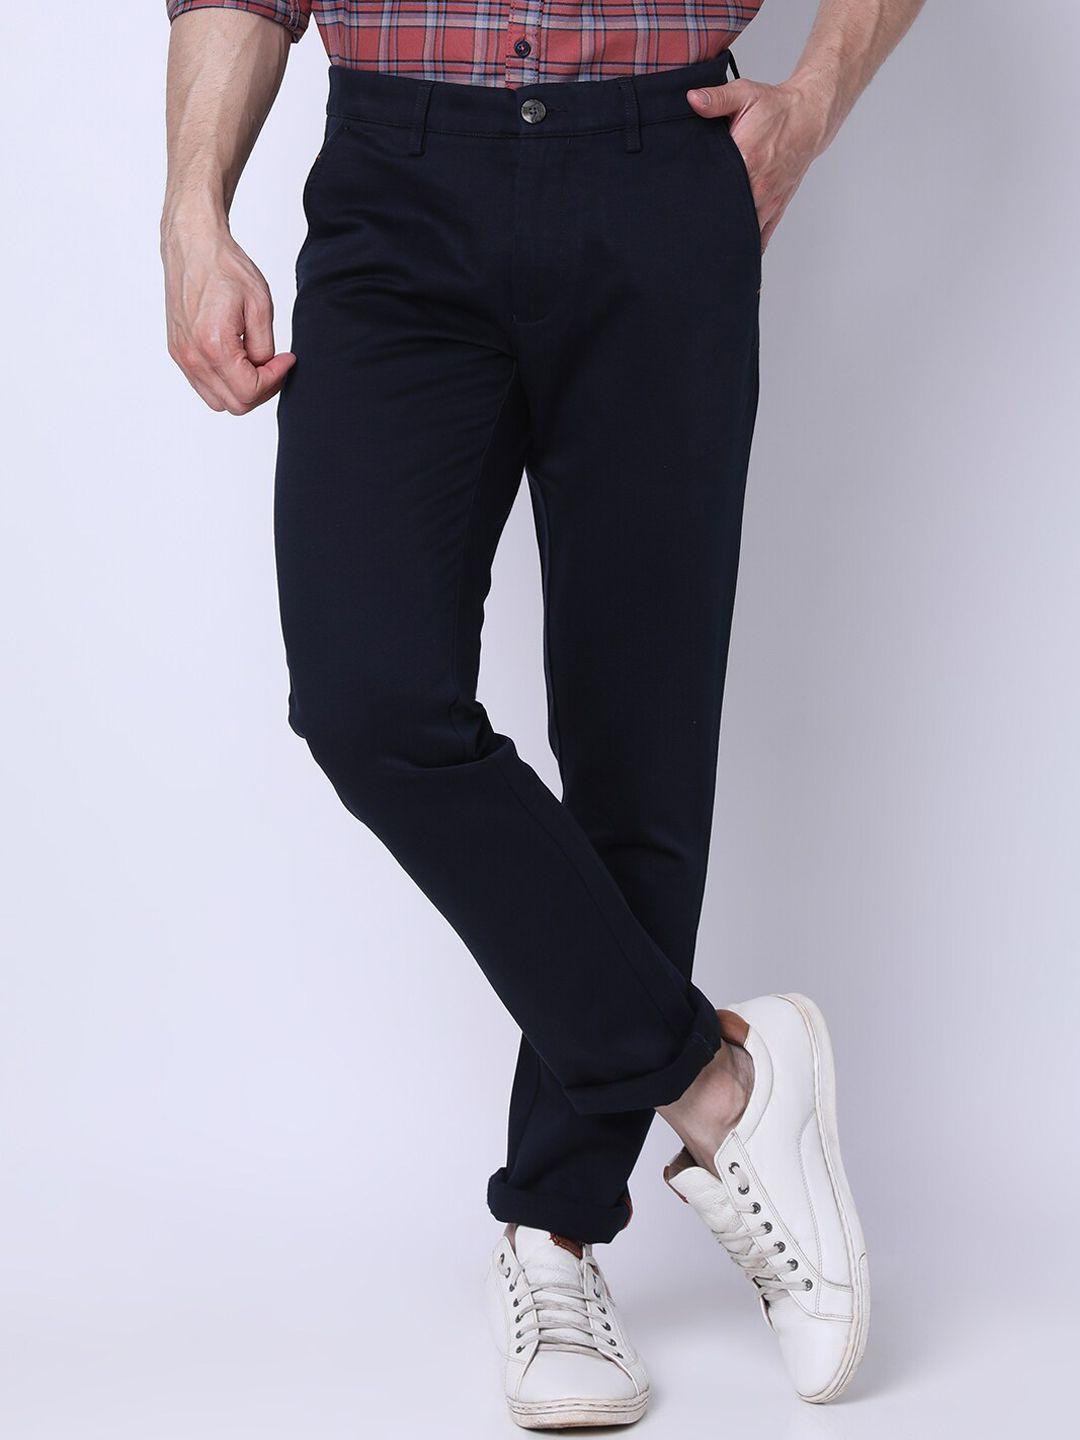 j hampstead men mid-rise slim fit cotton chinos trousers